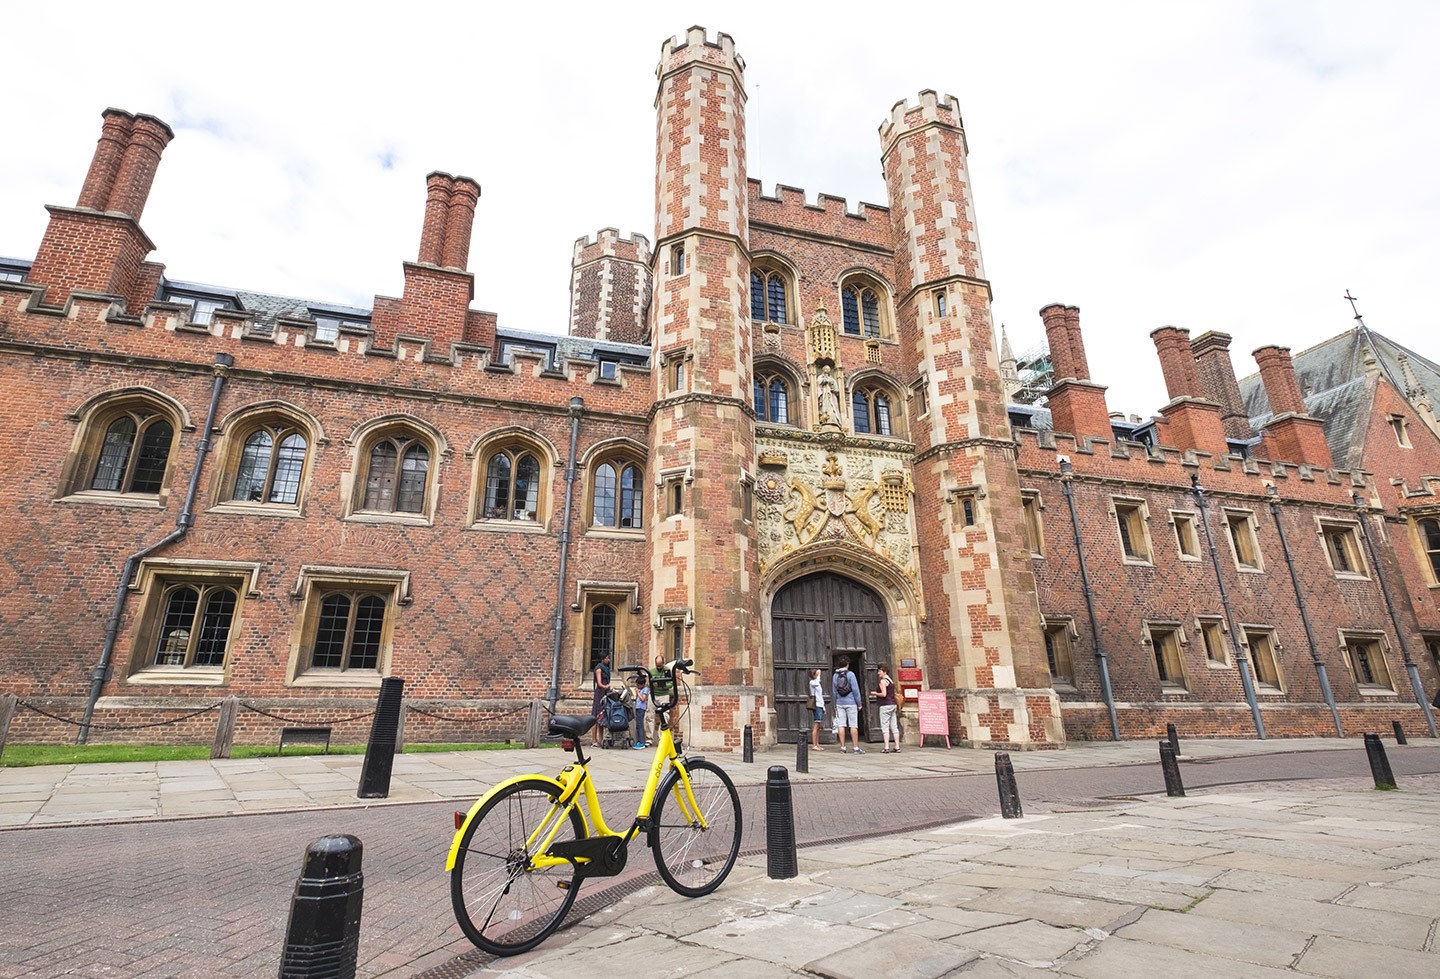 Cycing among the colleges in Cambridge